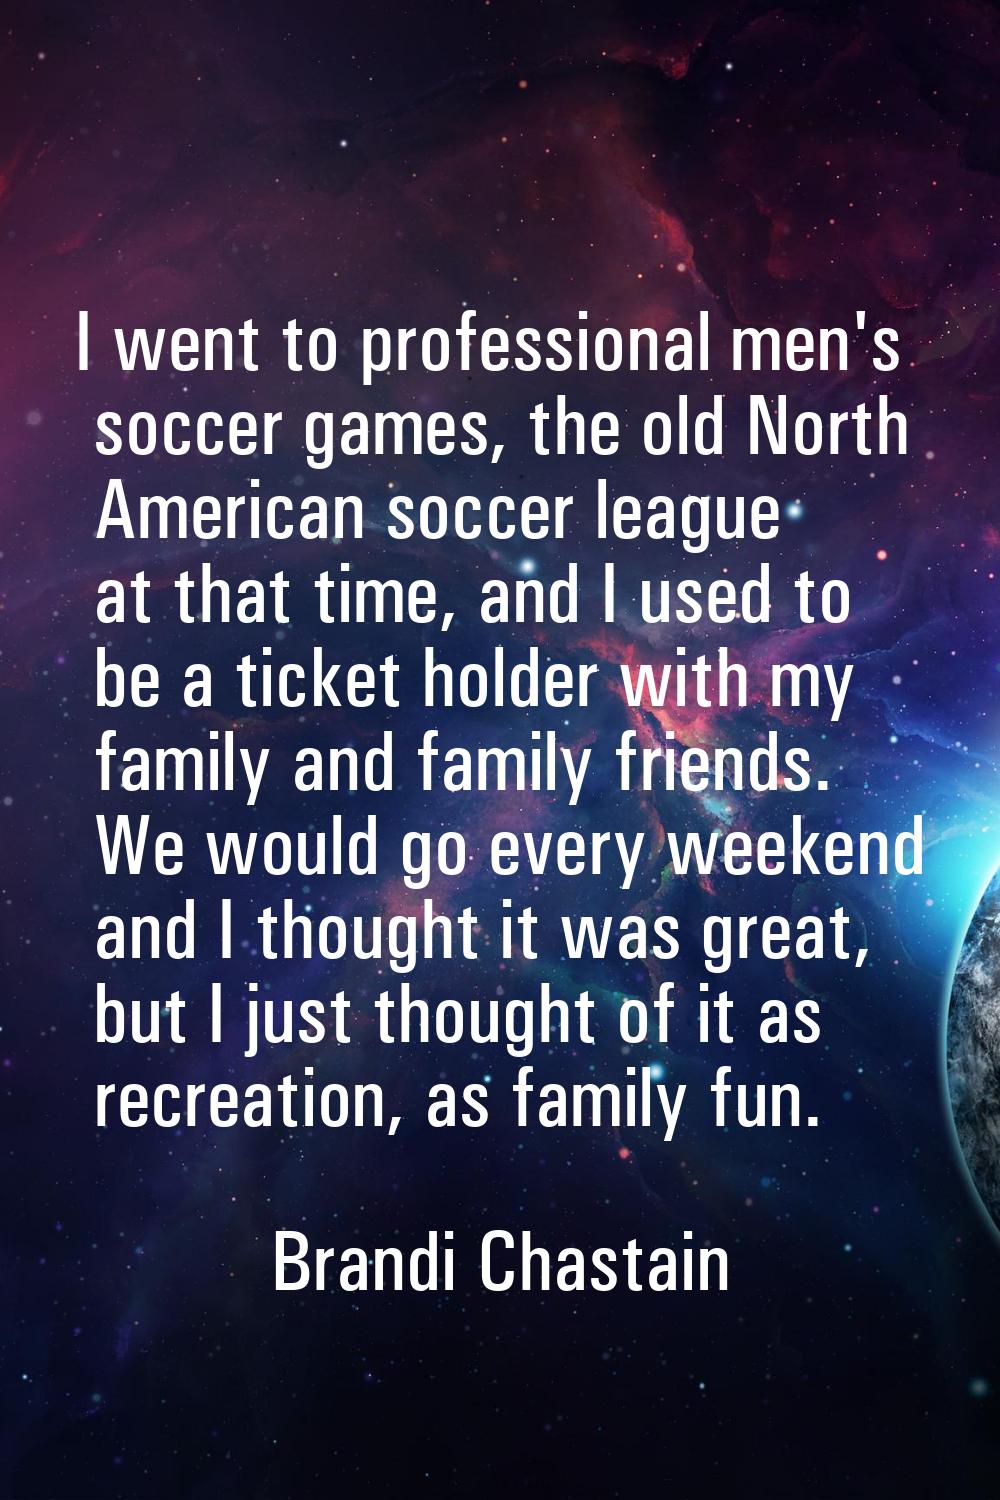 I went to professional men's soccer games, the old North American soccer league at that time, and I